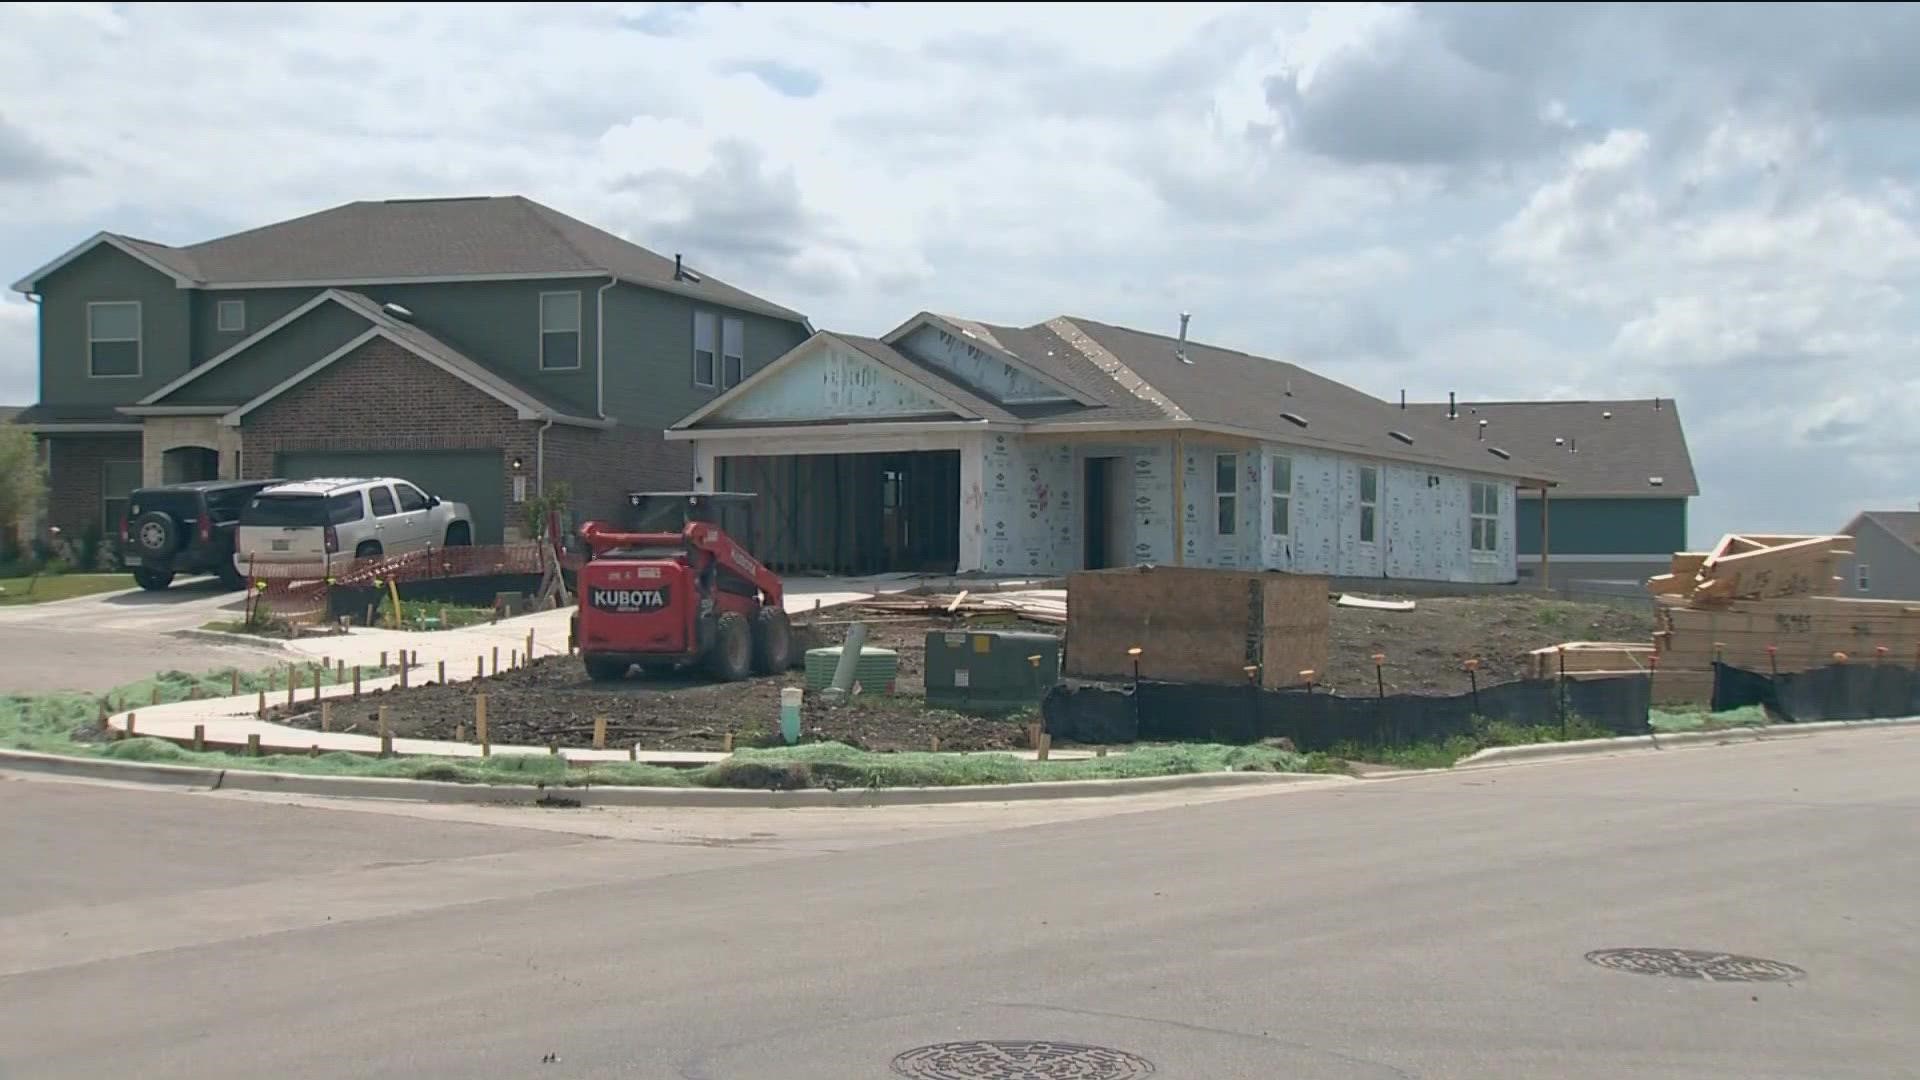 The Austin City Council on Thursday passed a measure to help bring more affordable housing to the city.